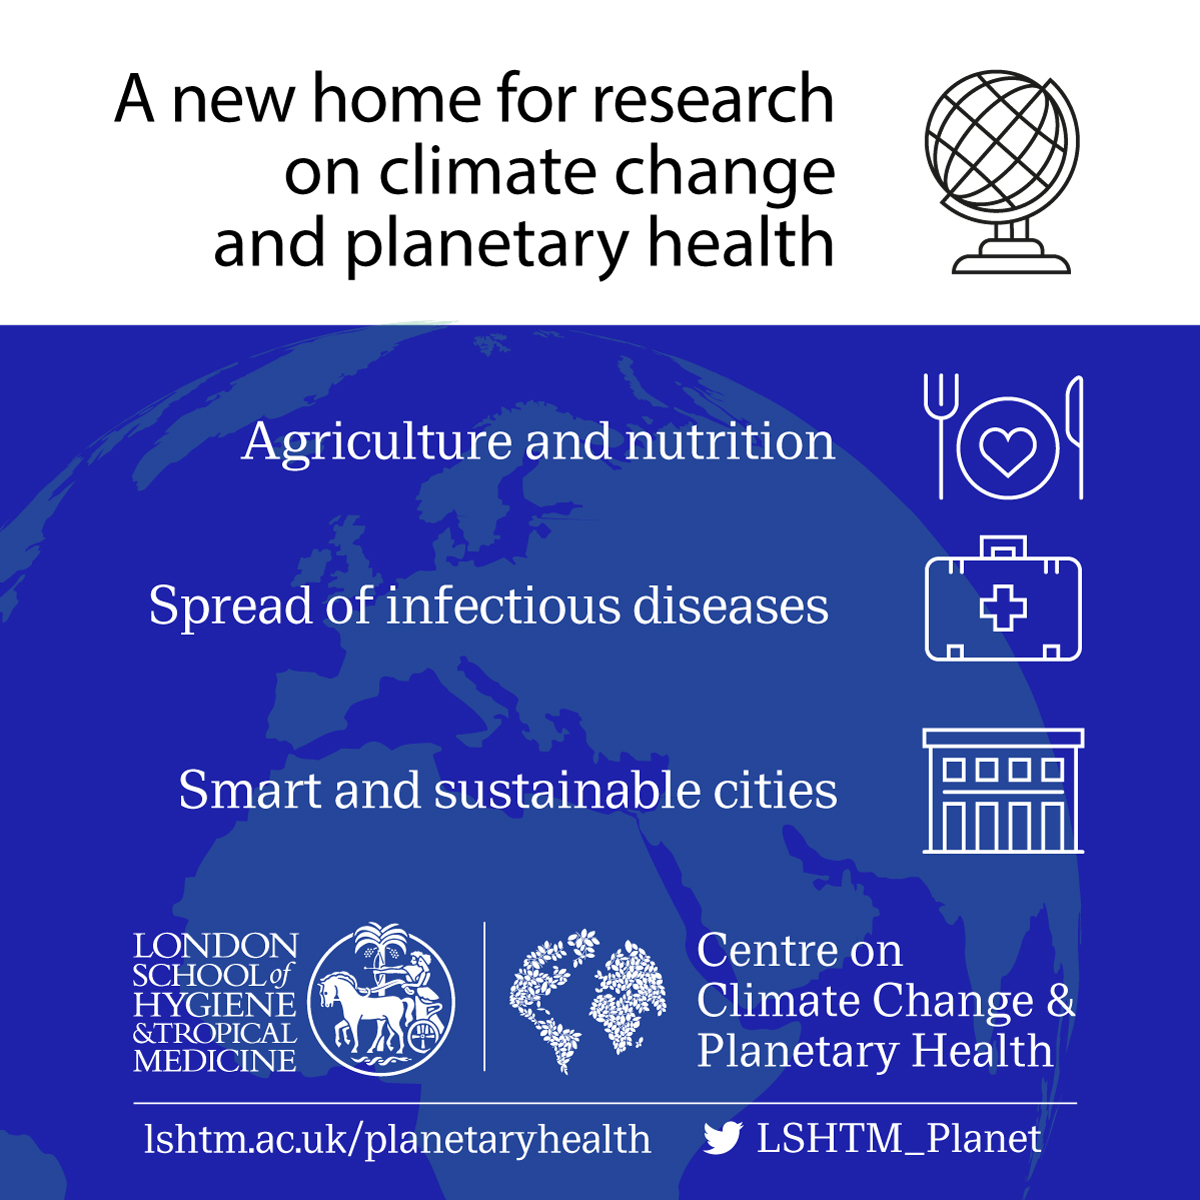 Centre on Climate Change & Planetary Health